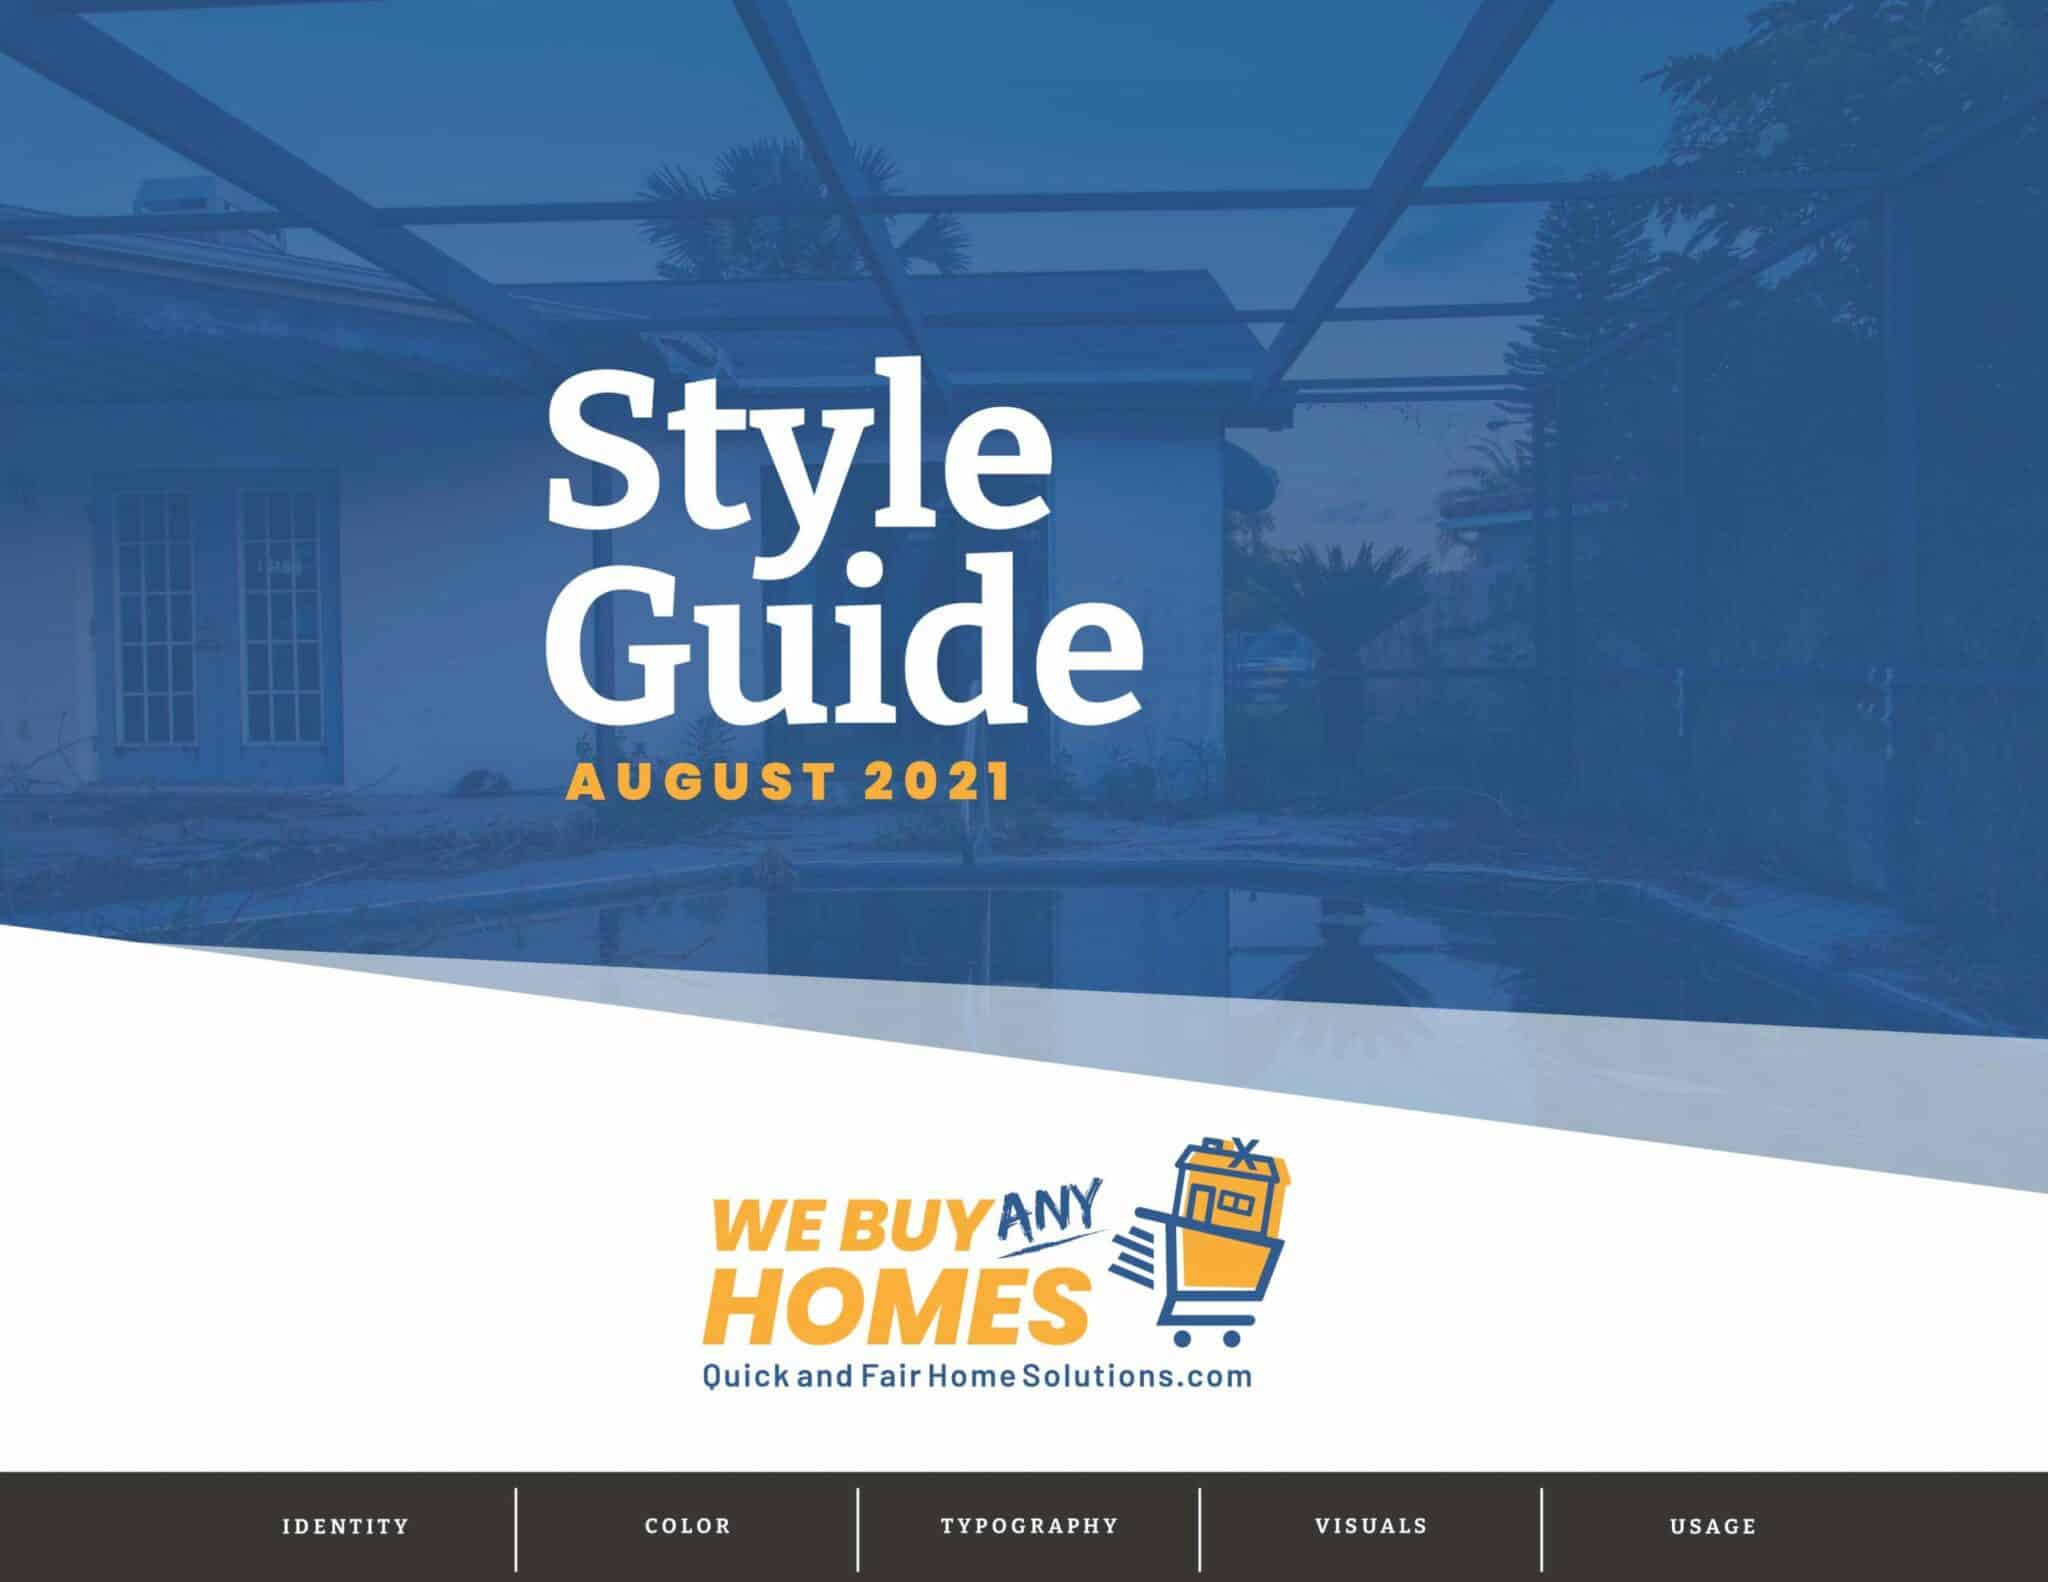 We Buy Any Homes Brand Guide - Cover